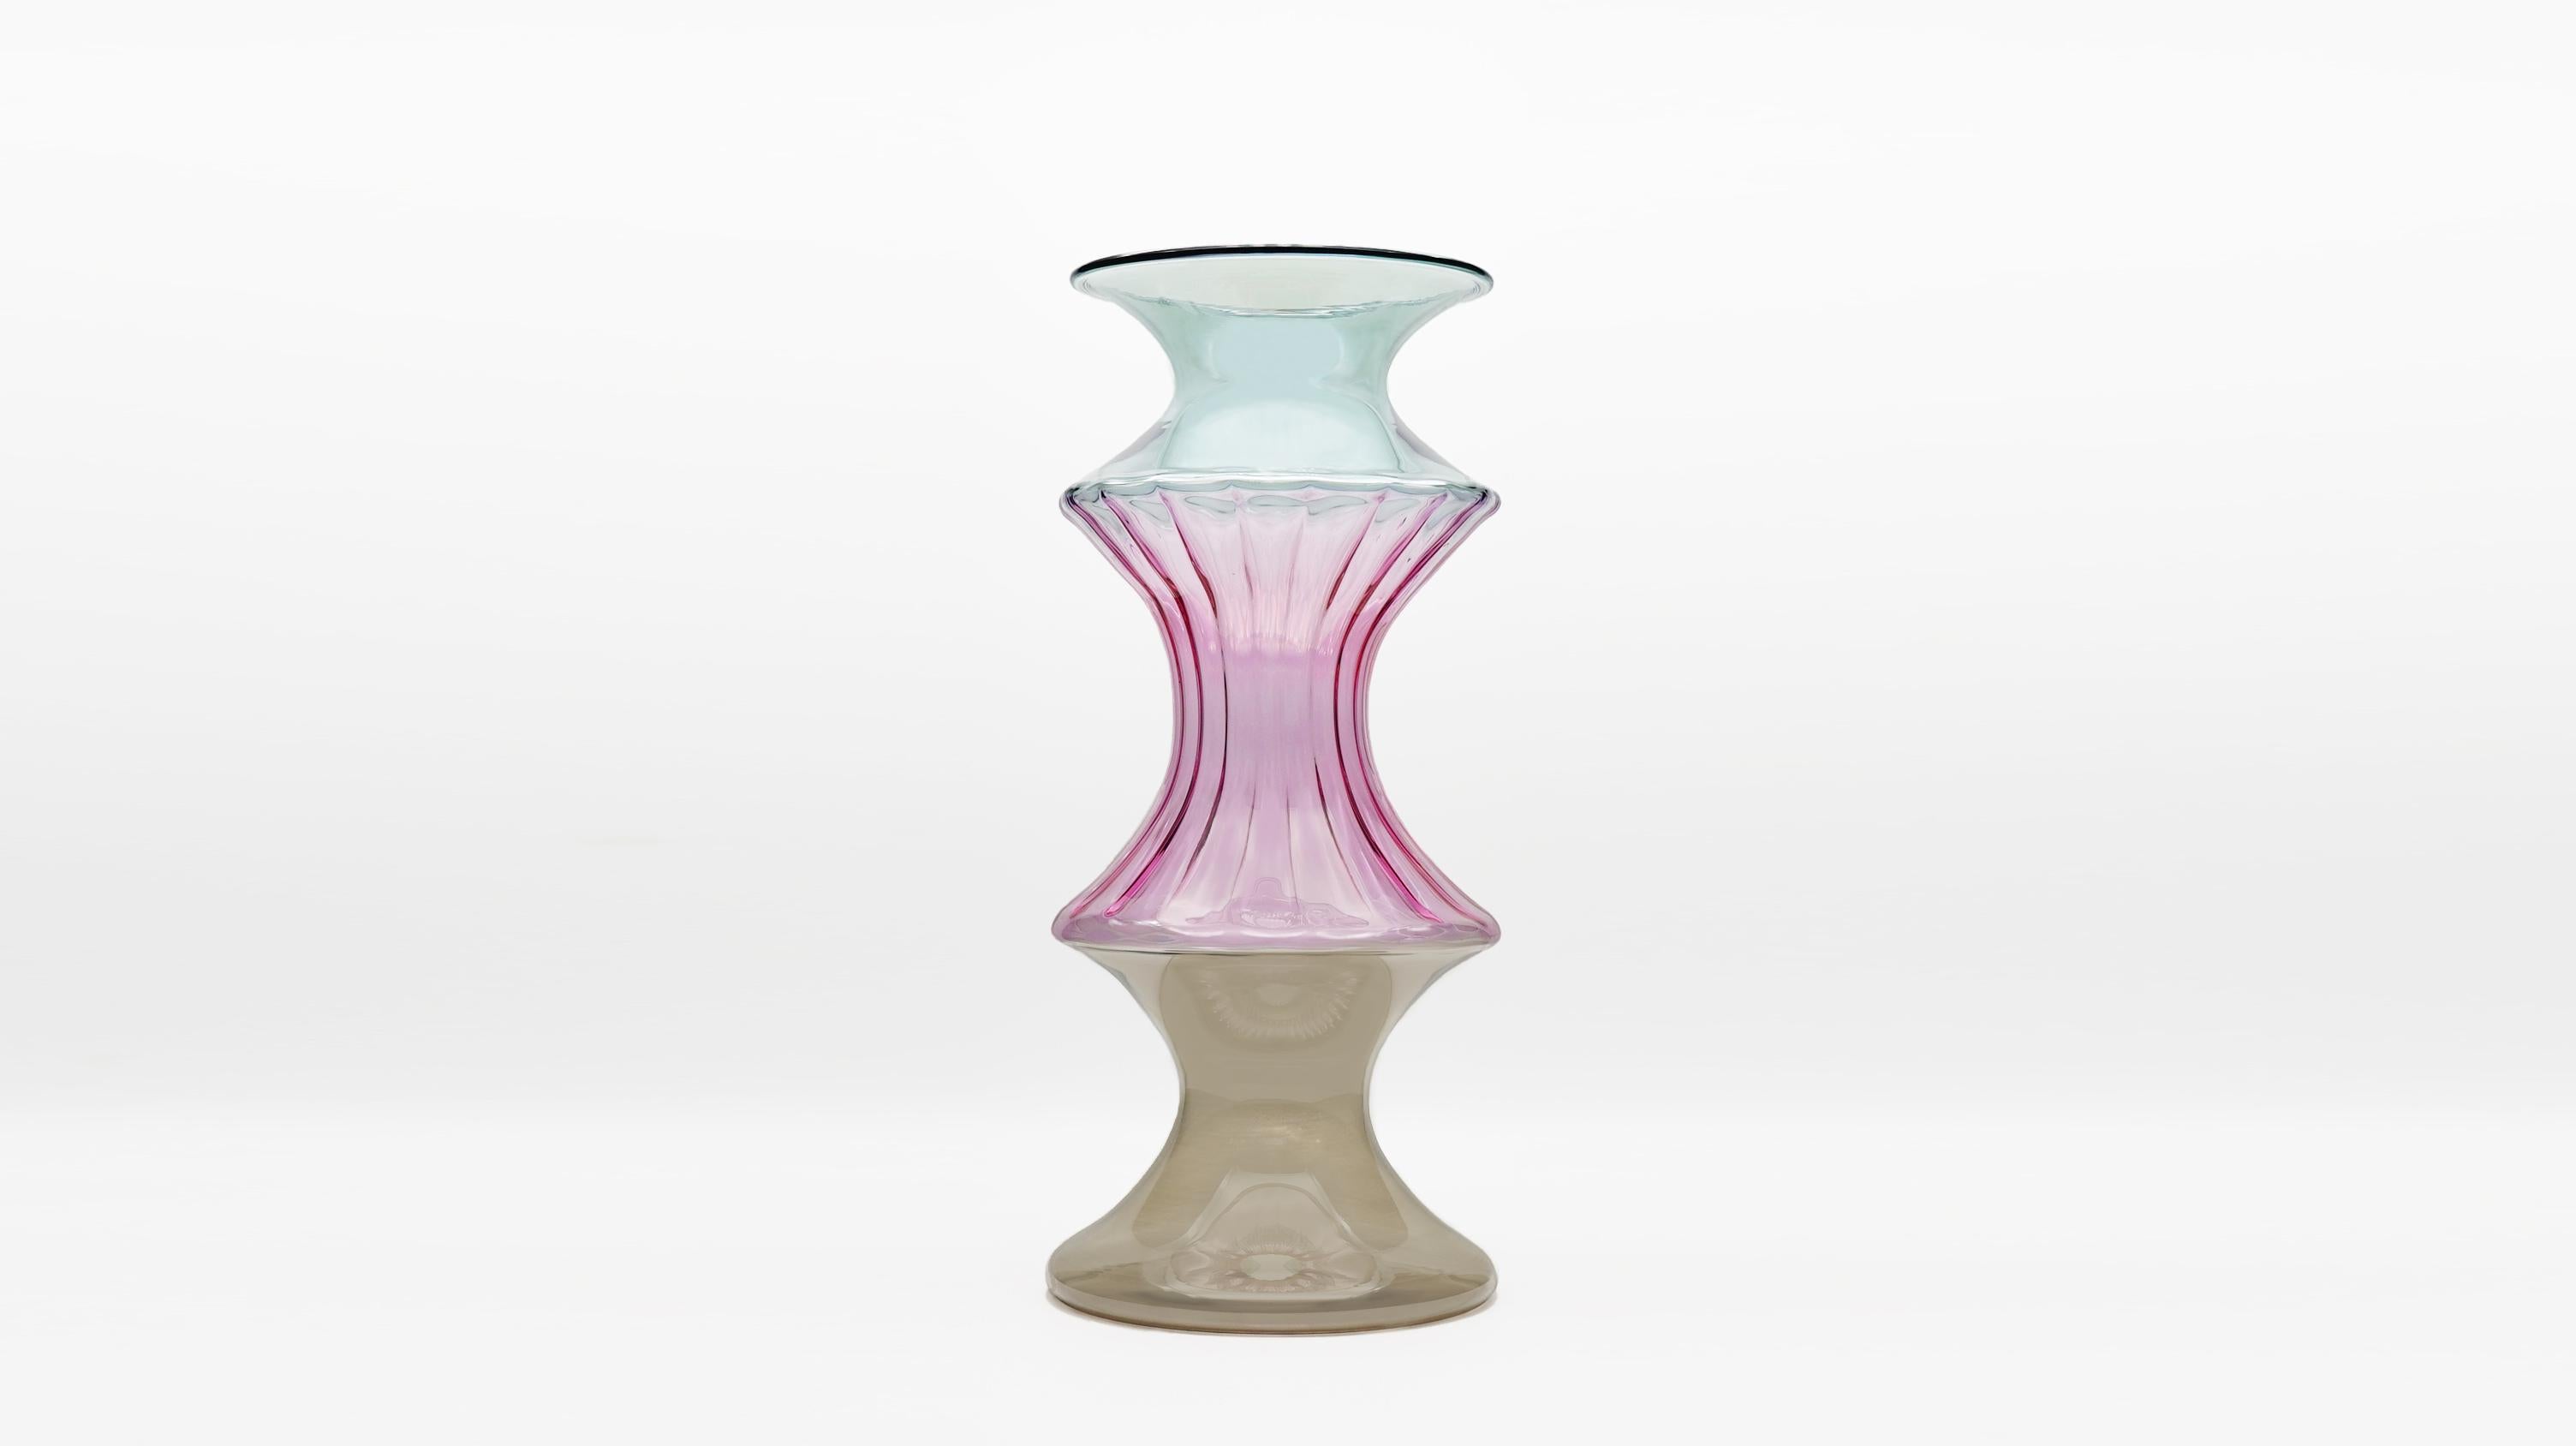 The Madame collection reinterprets traditional Venetian vases, their refined details and delicate colors. The shape comes from the decomposition and composition of the typical flaring, which repeated creates ever-changing shapes but each